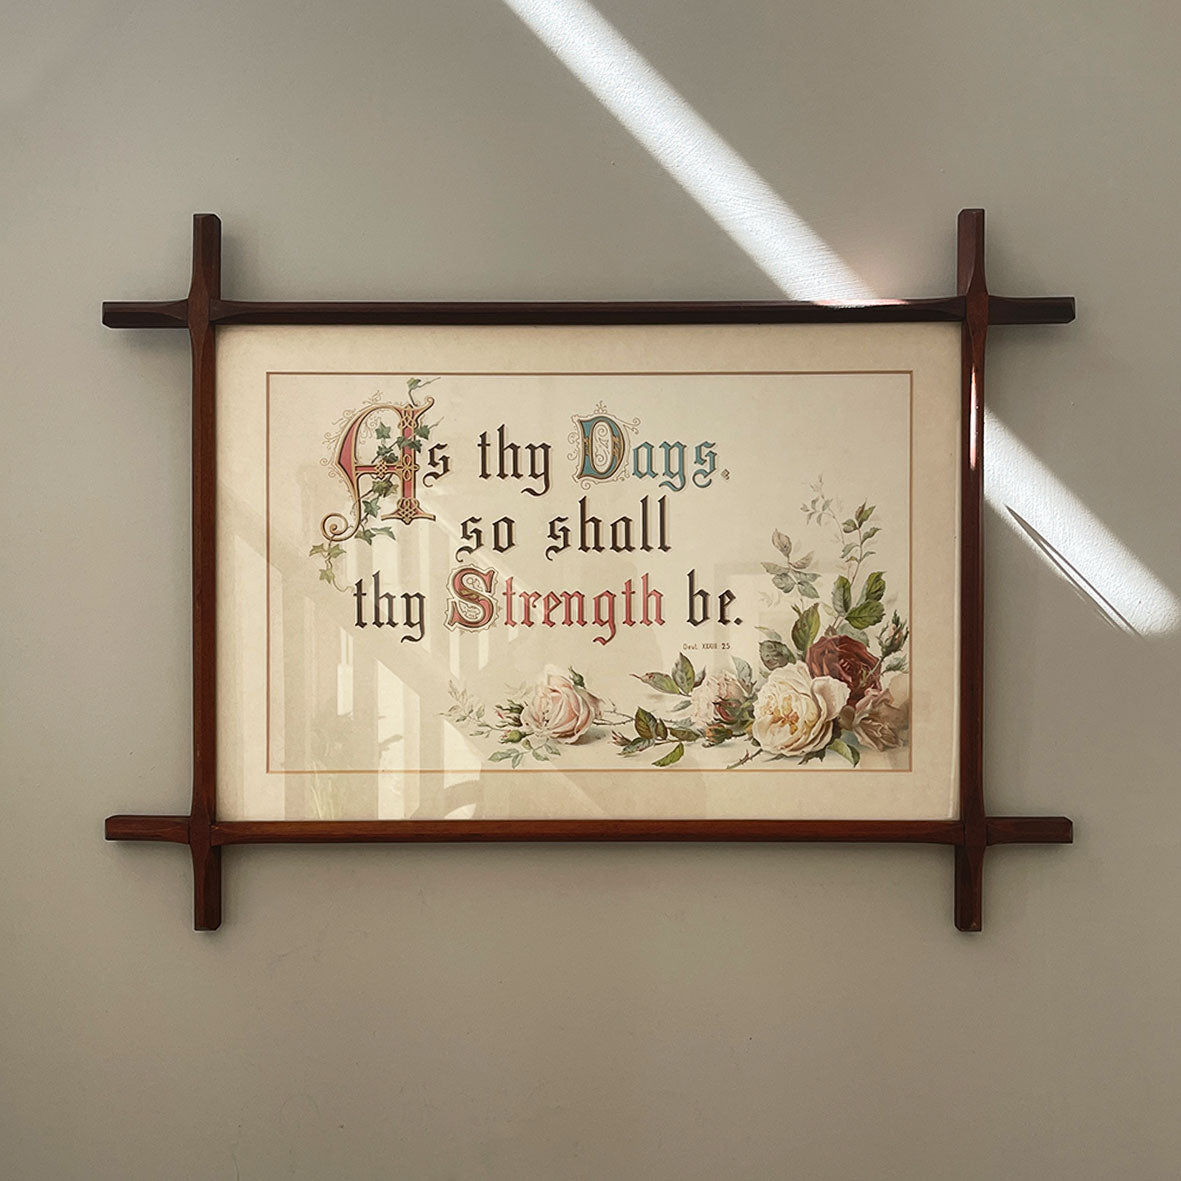 A delightful large religious print with the words 'As thy Days so shall thy Strength be'. Good colourful typography and in its original mahogany cross-jointed frame - SHOP NOW - www.intovintage.co.uk